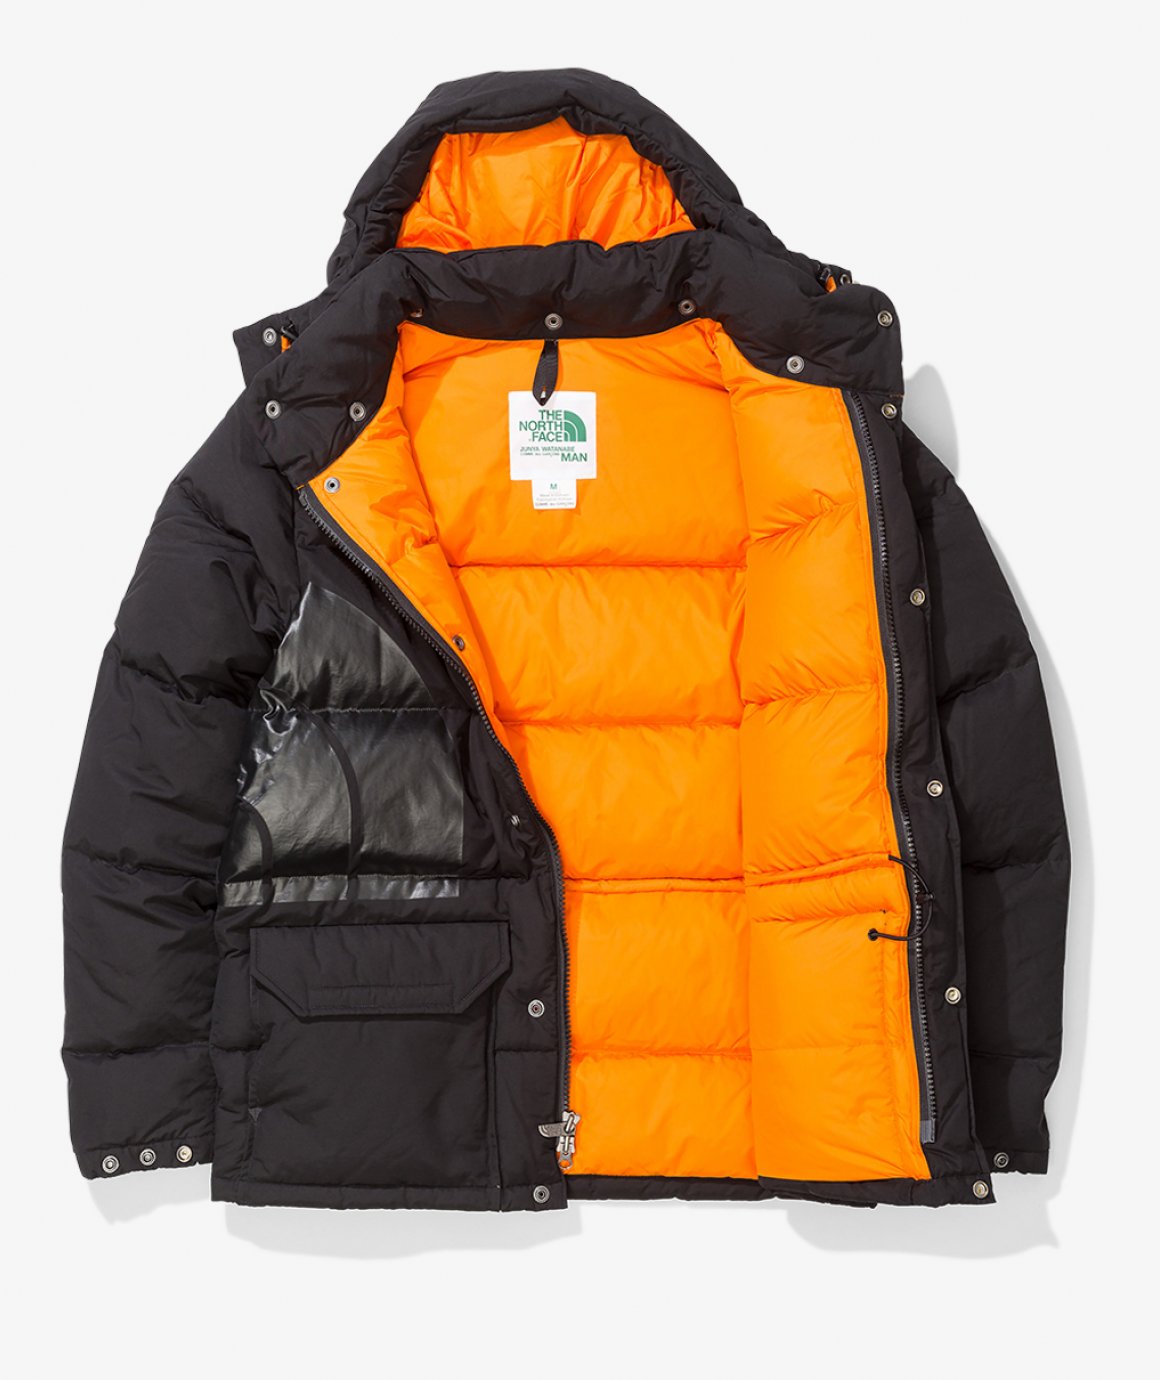 Junya Watanabe MAN and The North Face brings back an iconic puffer ...